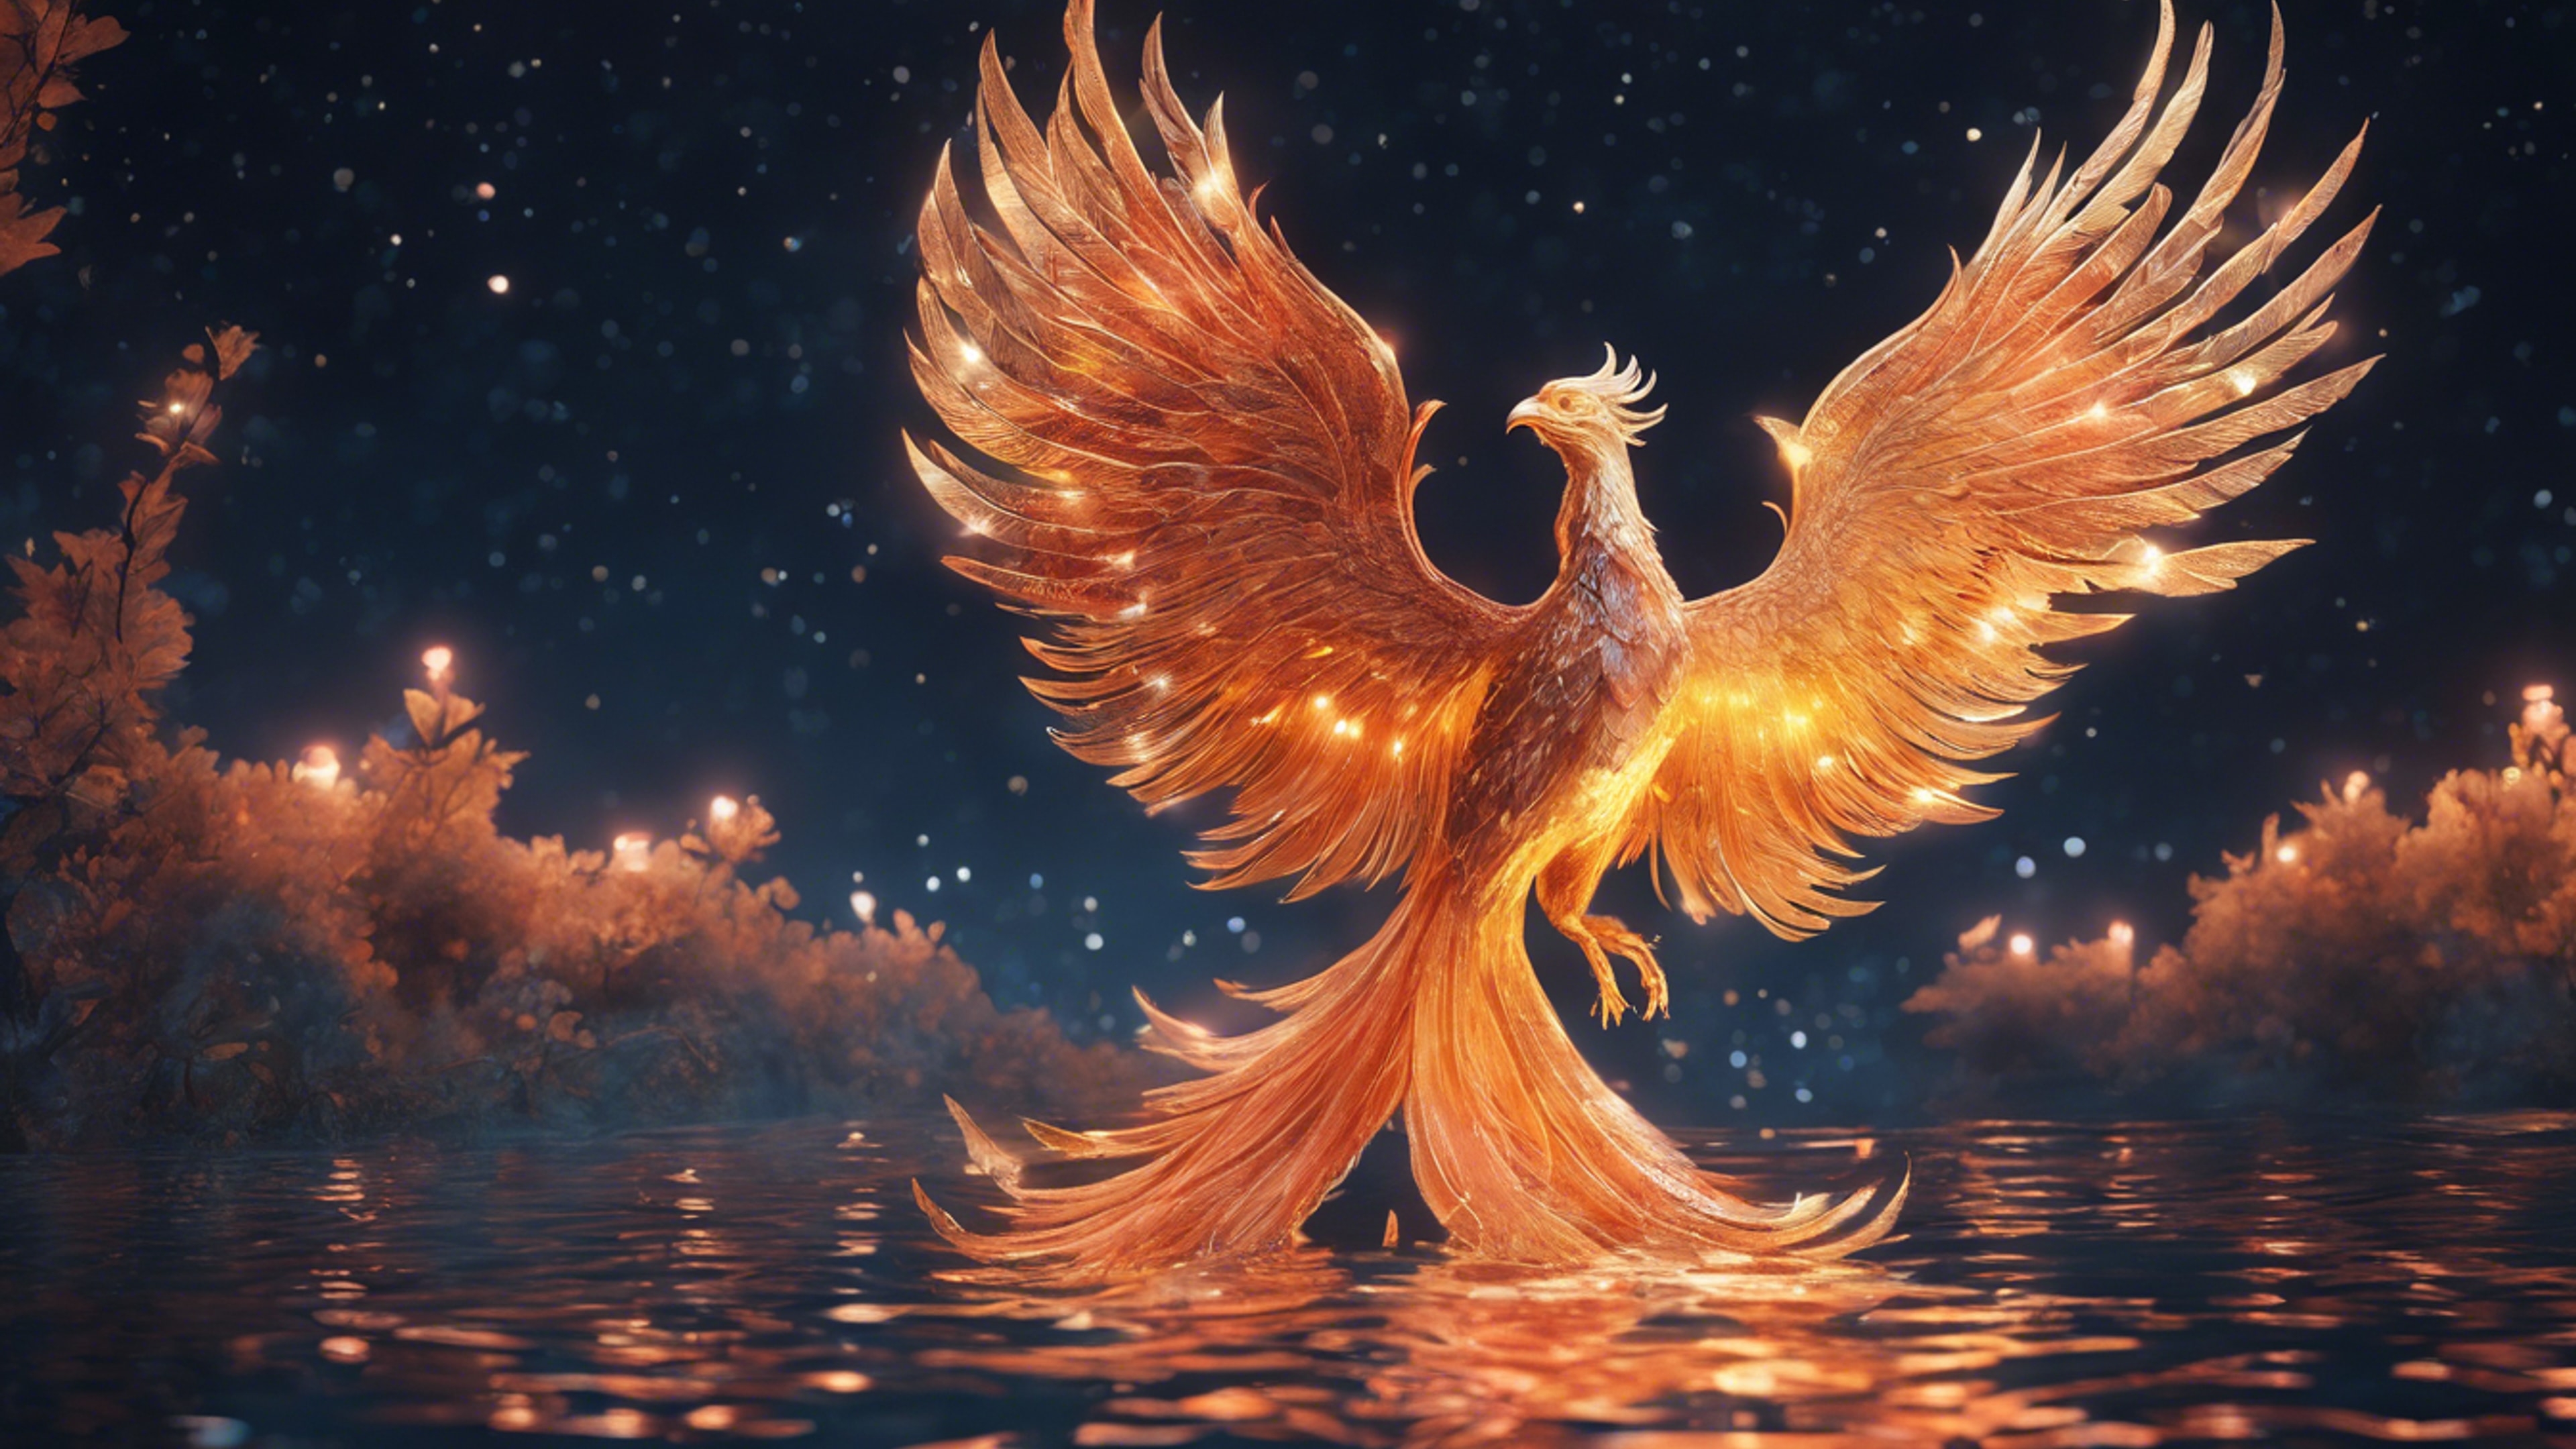 A beautiful scene depicting a mythical phoenix bathing in the glow of the midnight moon.壁紙[60dca798264c4df78287]